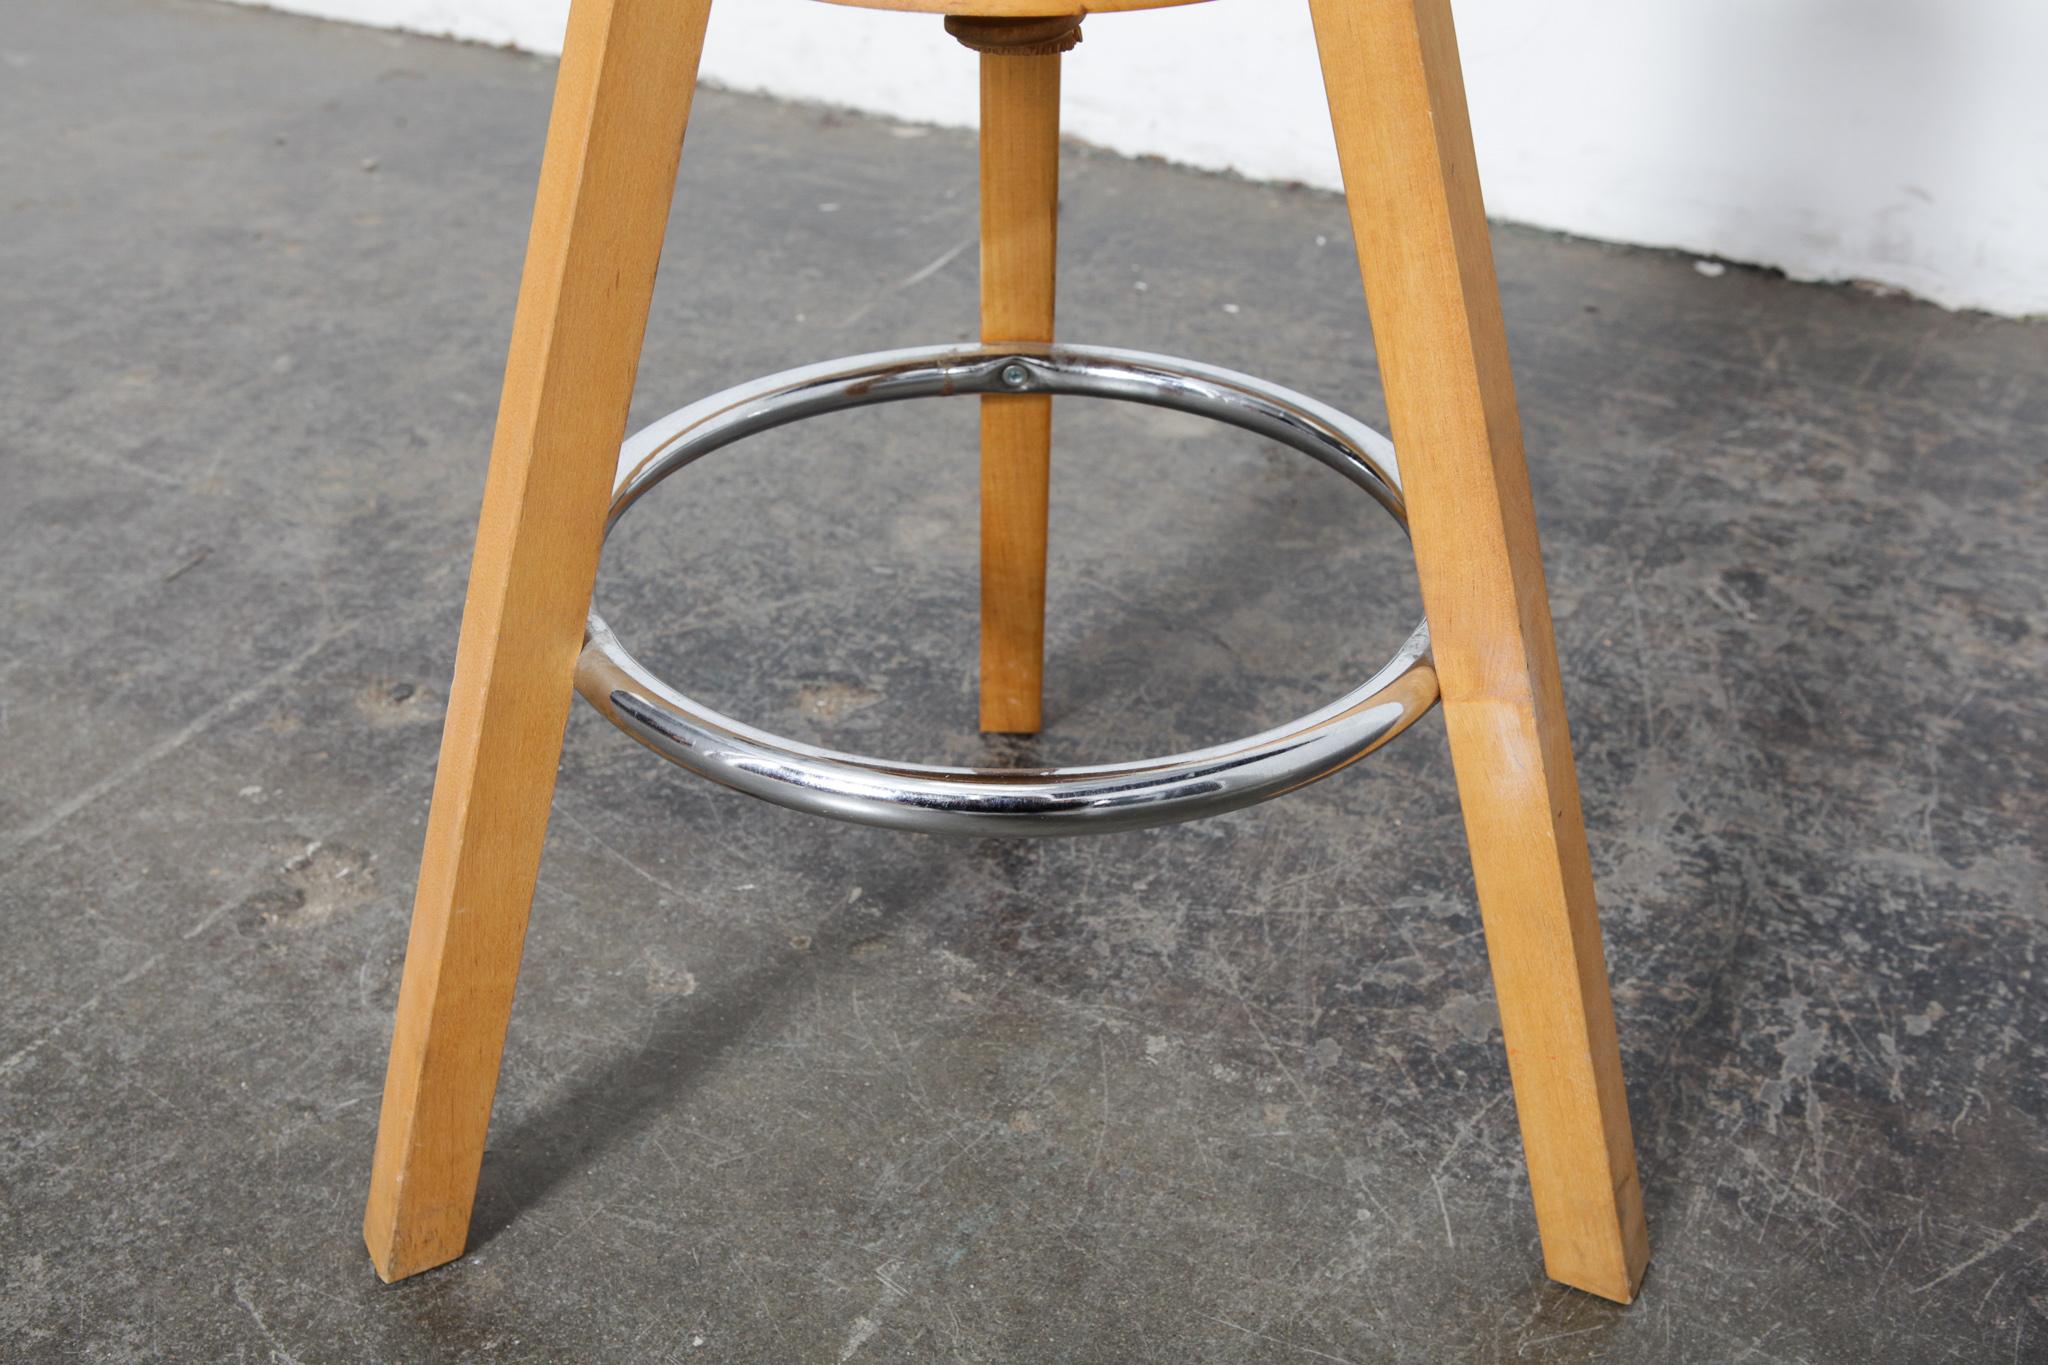 Ceramic Adjustable Stool from Finland with Mosaic Tile Seat by Designer Martin Cheek For Sale